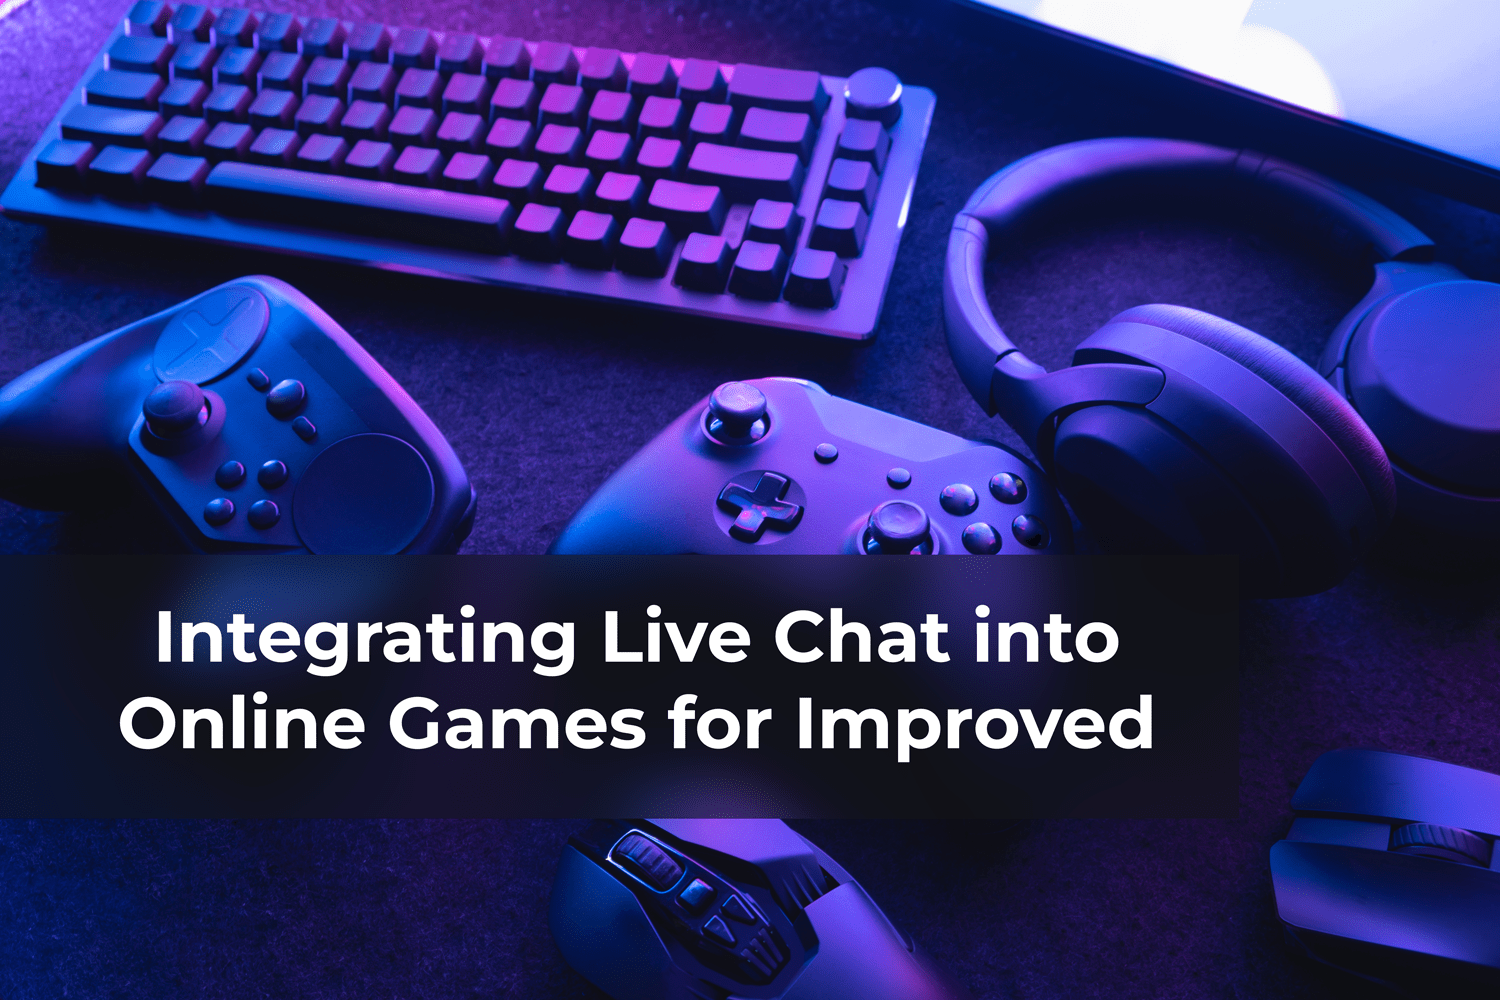 Integrating Live Chat into Online Games for Improved Communication